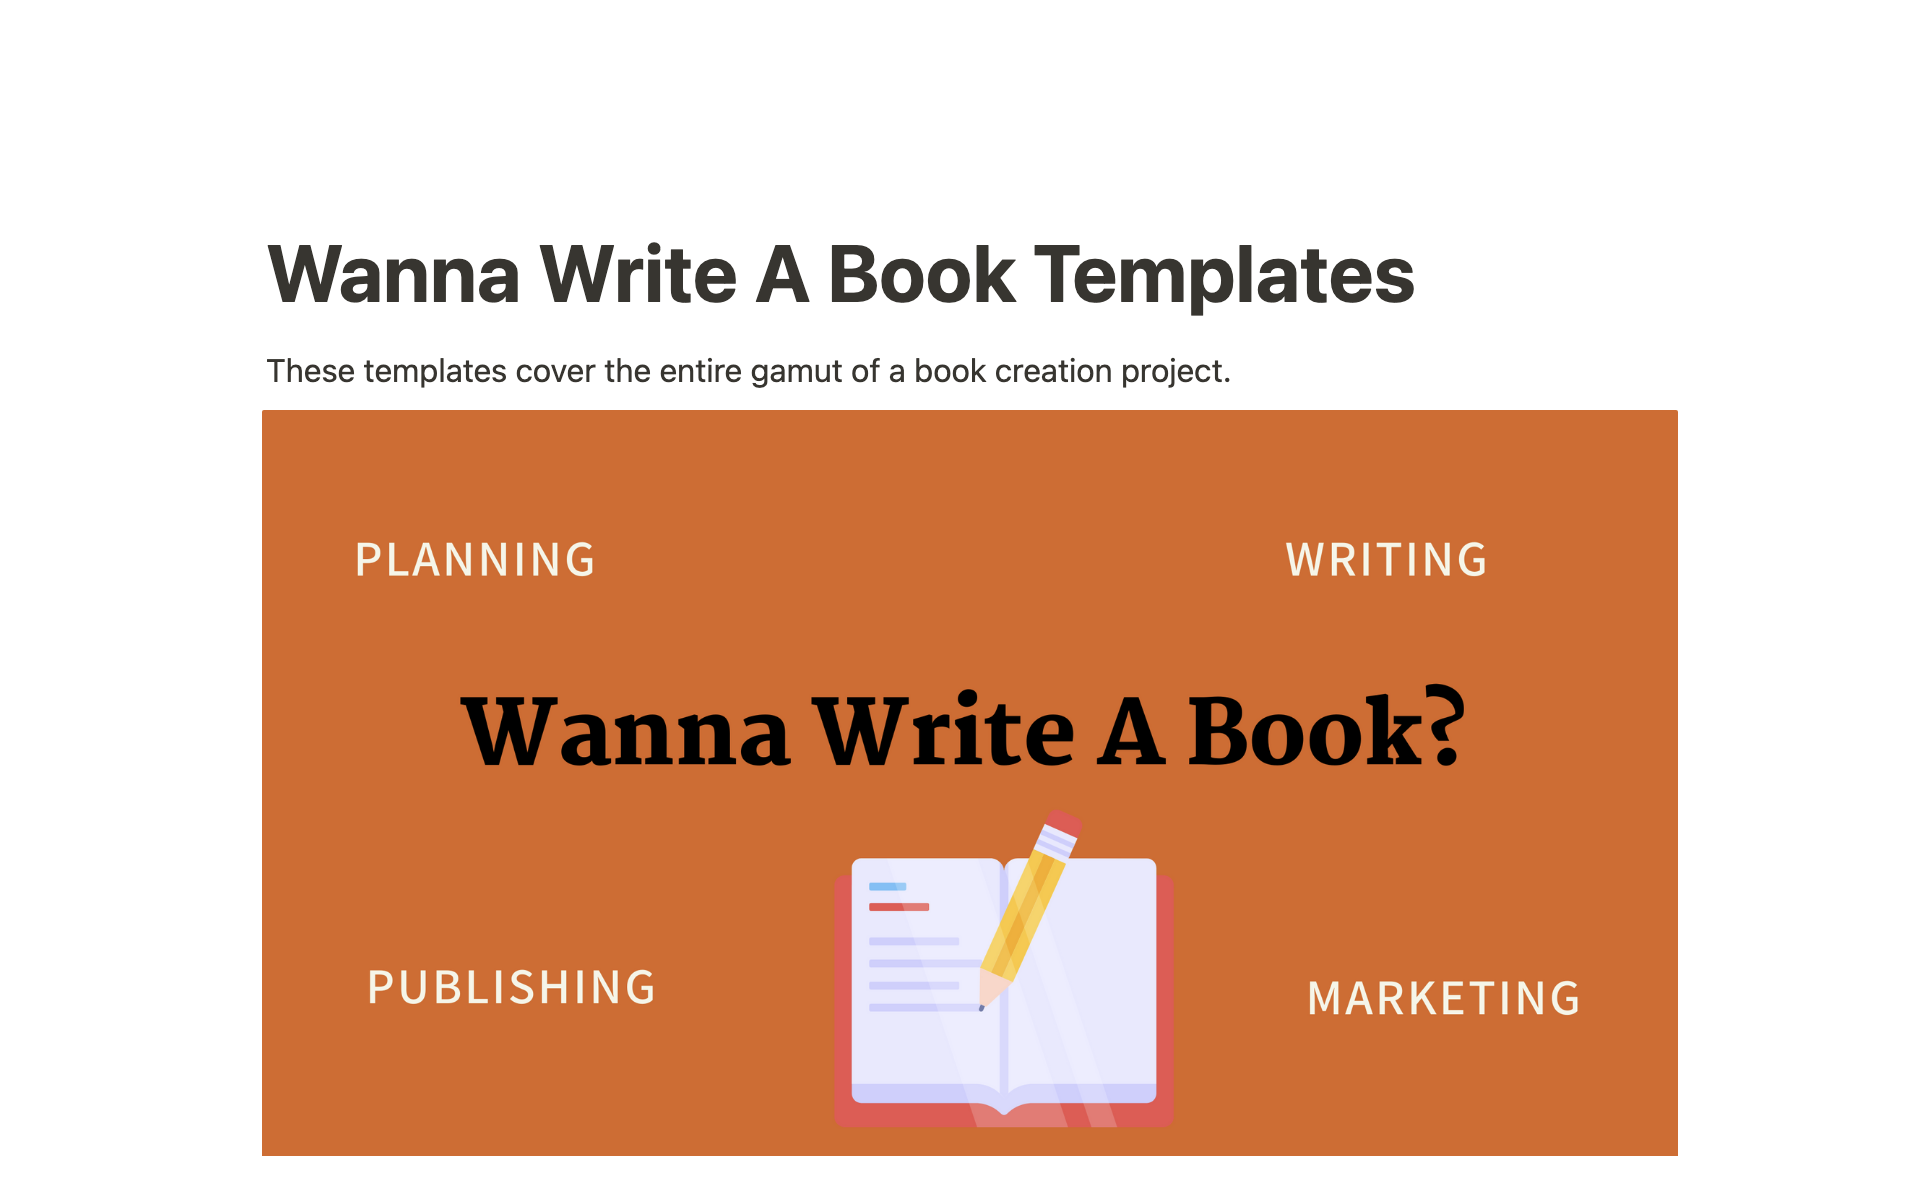 Guide an author through the four phases of a book creation project